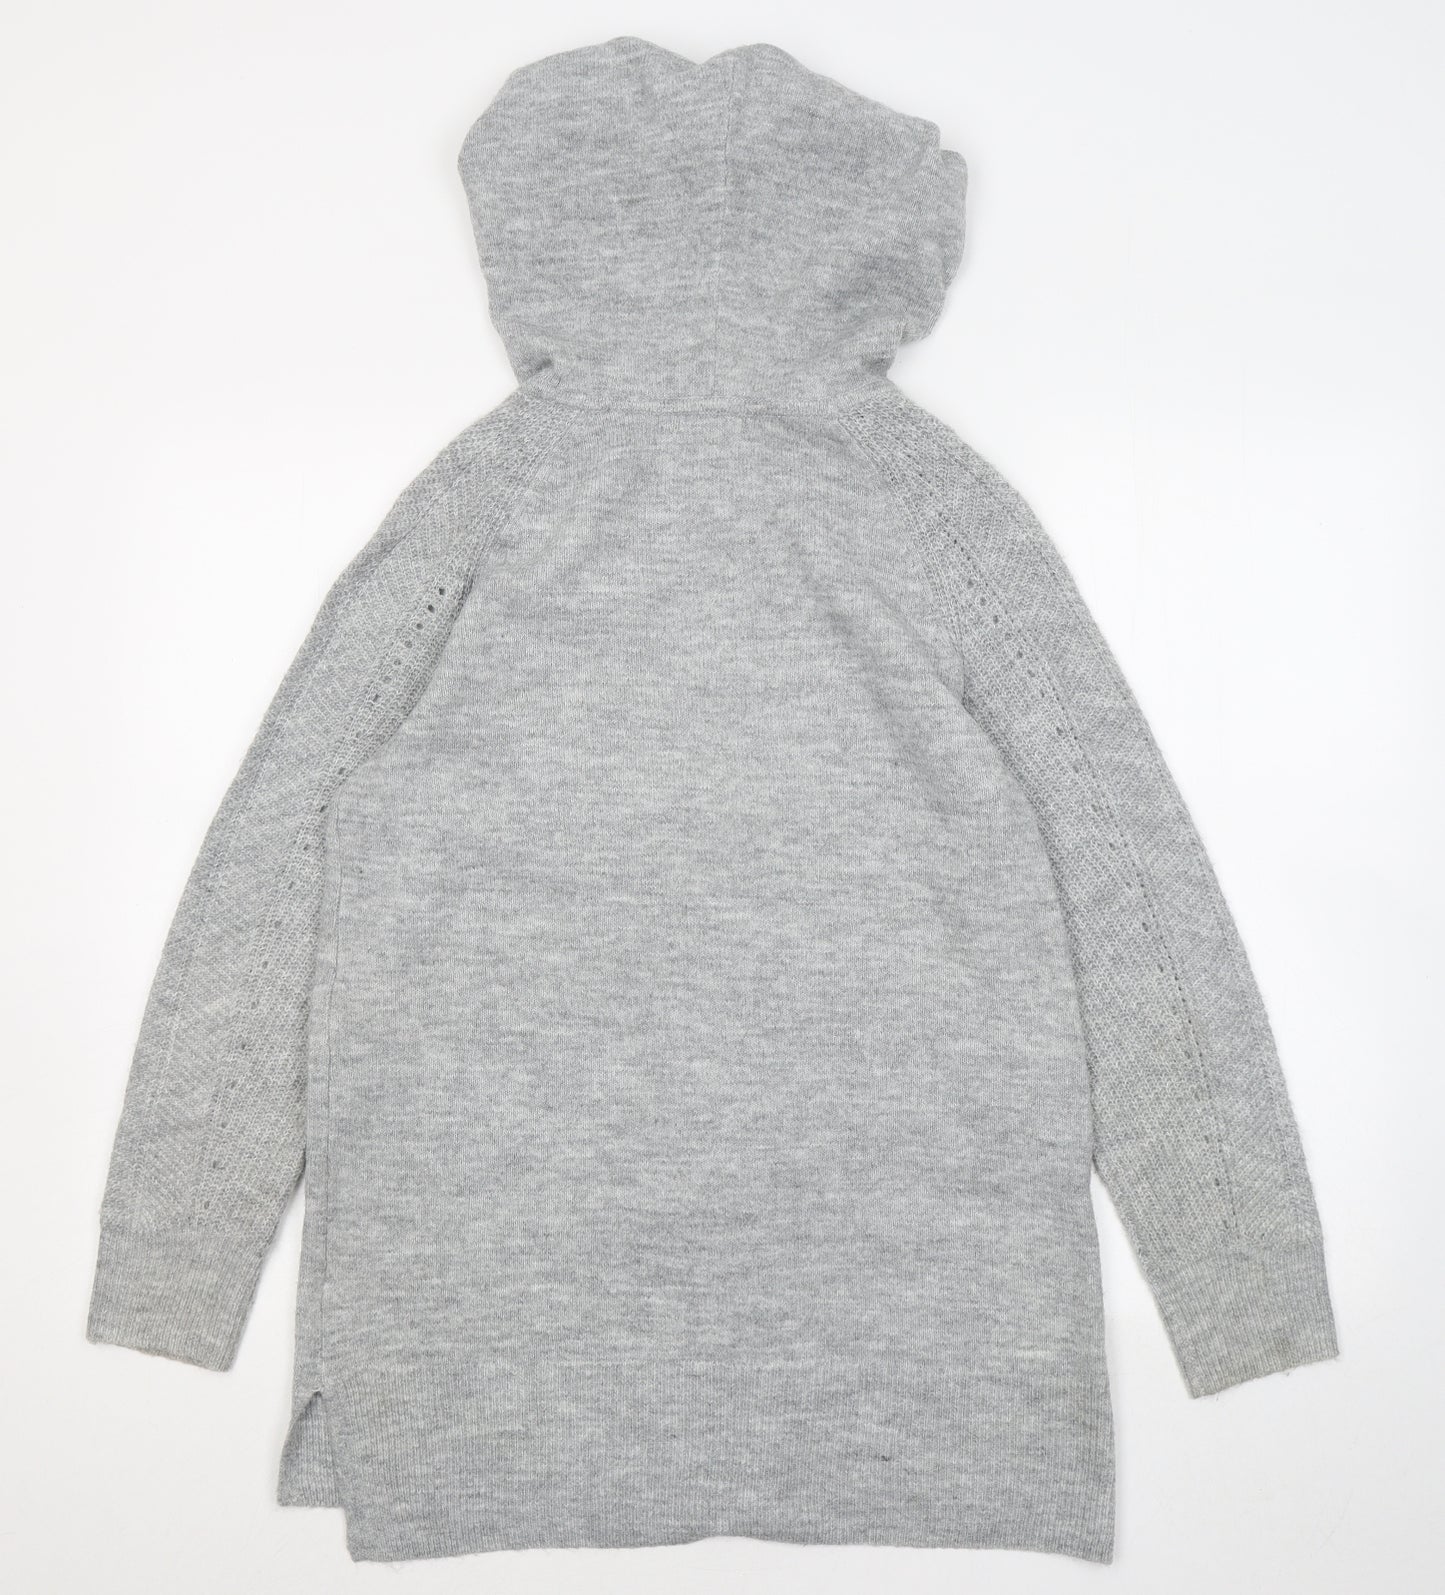 Reitmans Womens Grey Acrylic Pullover Hoodie Size M